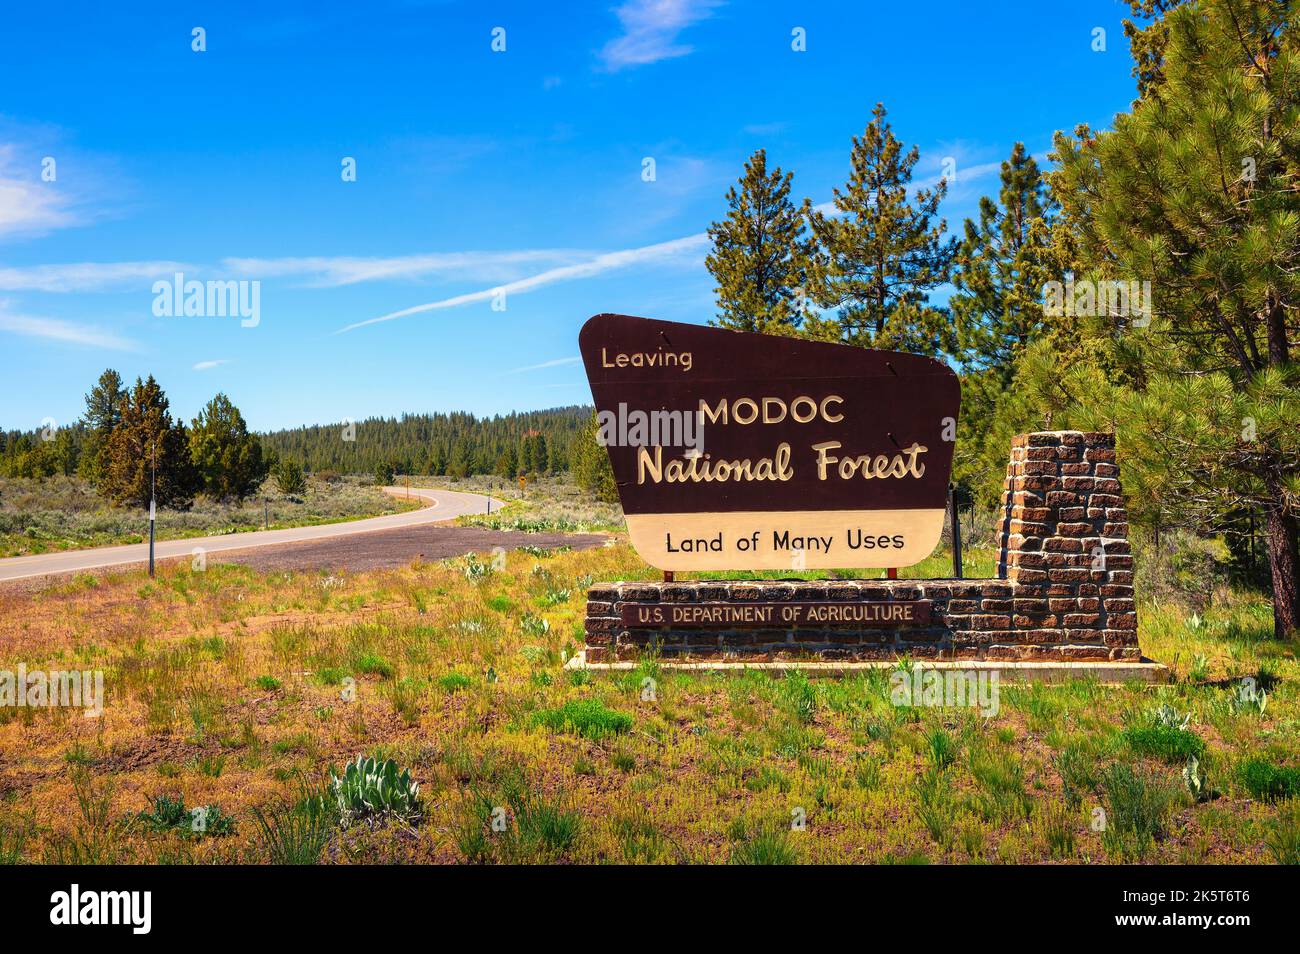 Modoc National Forest street sign located in Northeastern California. Stock Photo